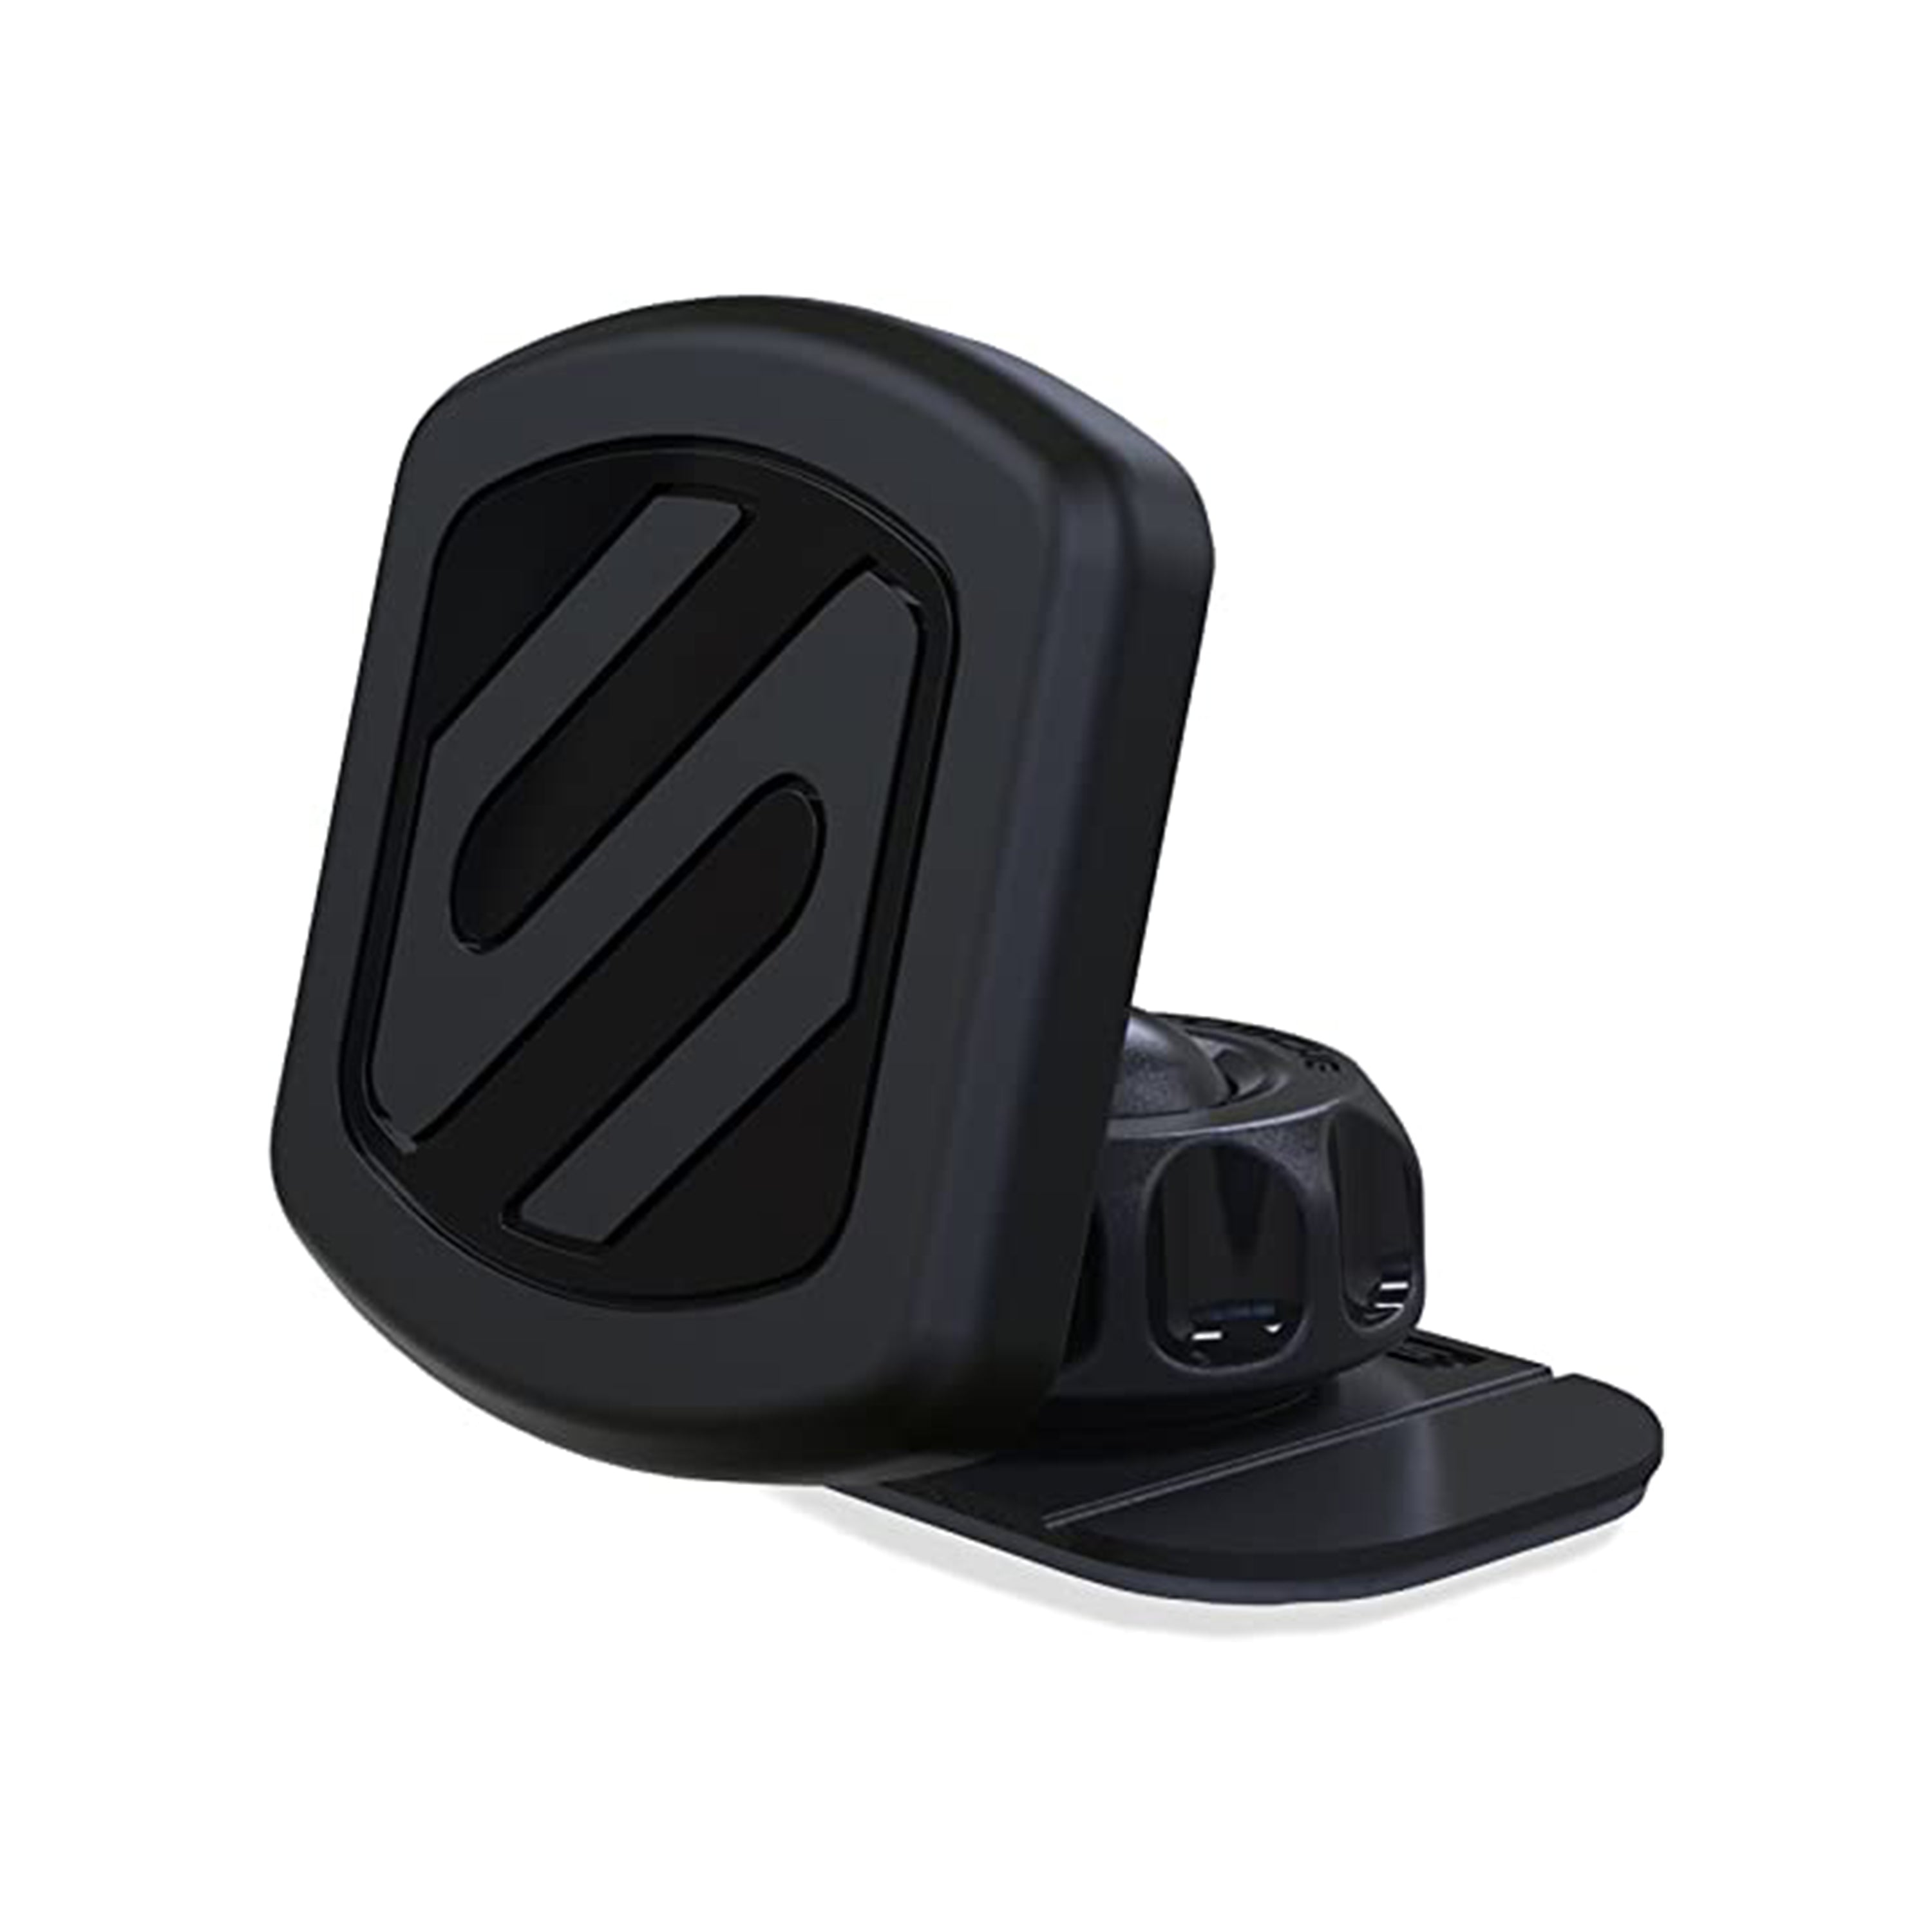 Scosche MAGDM, MagicMount Magnetic Dash Mount For Mobile Devices (Black)